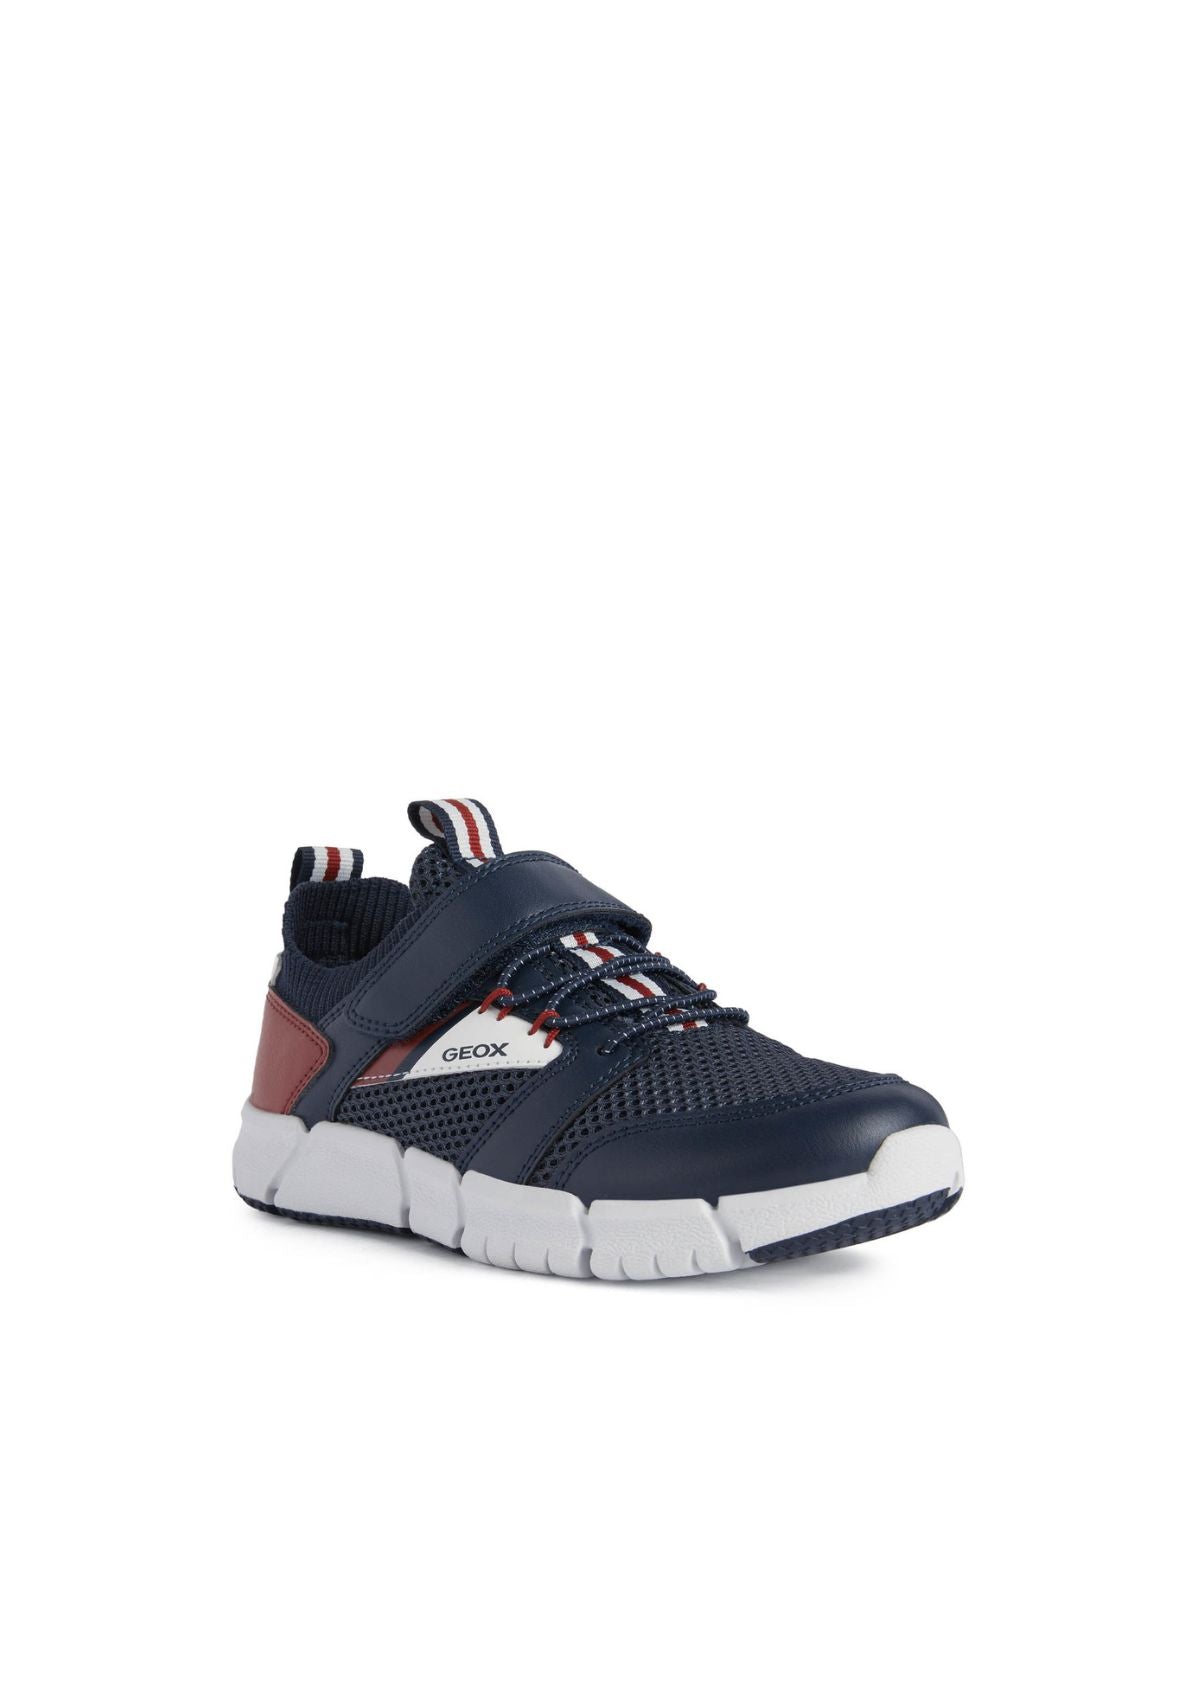 Geox Boys Trainers FLEXYPER Navy Red side front